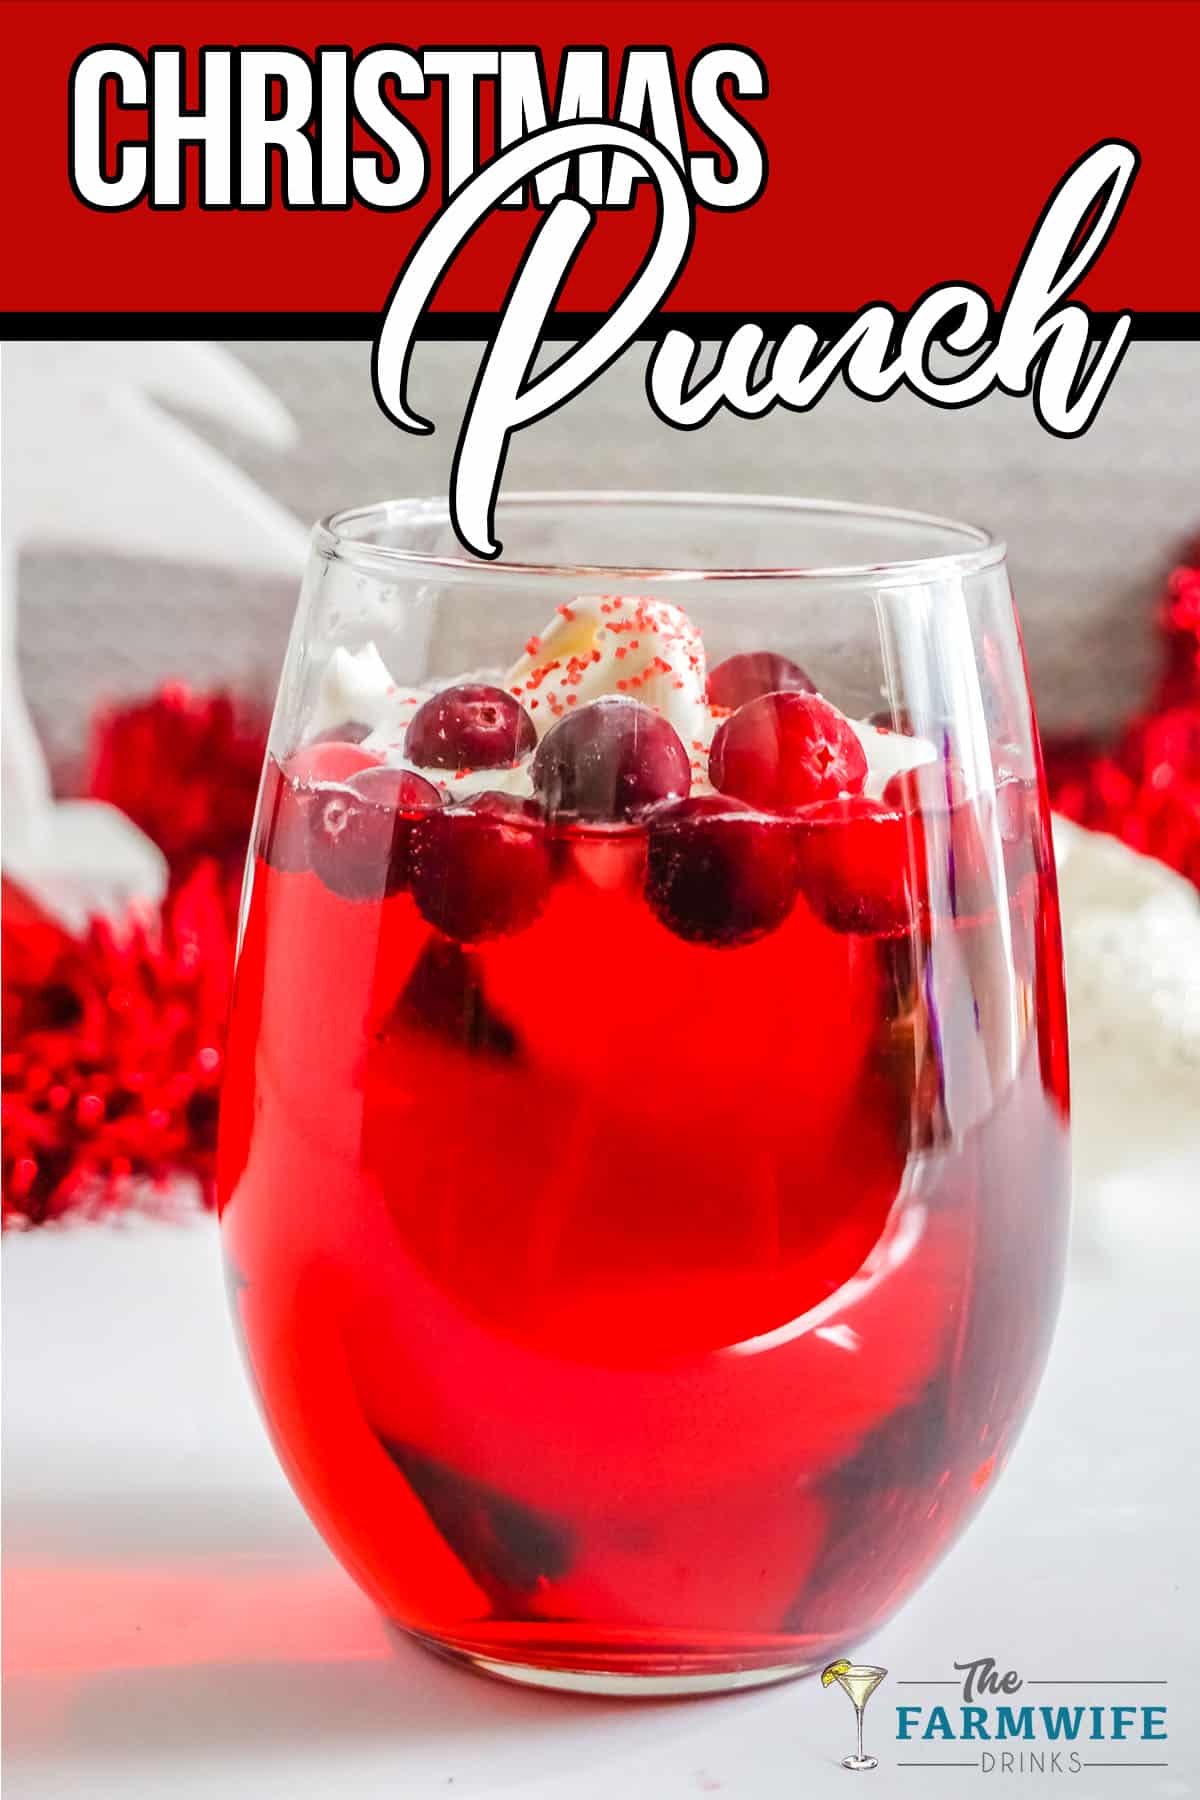 Cranberries and Whipped Cream top a delicious Christmas Punch.